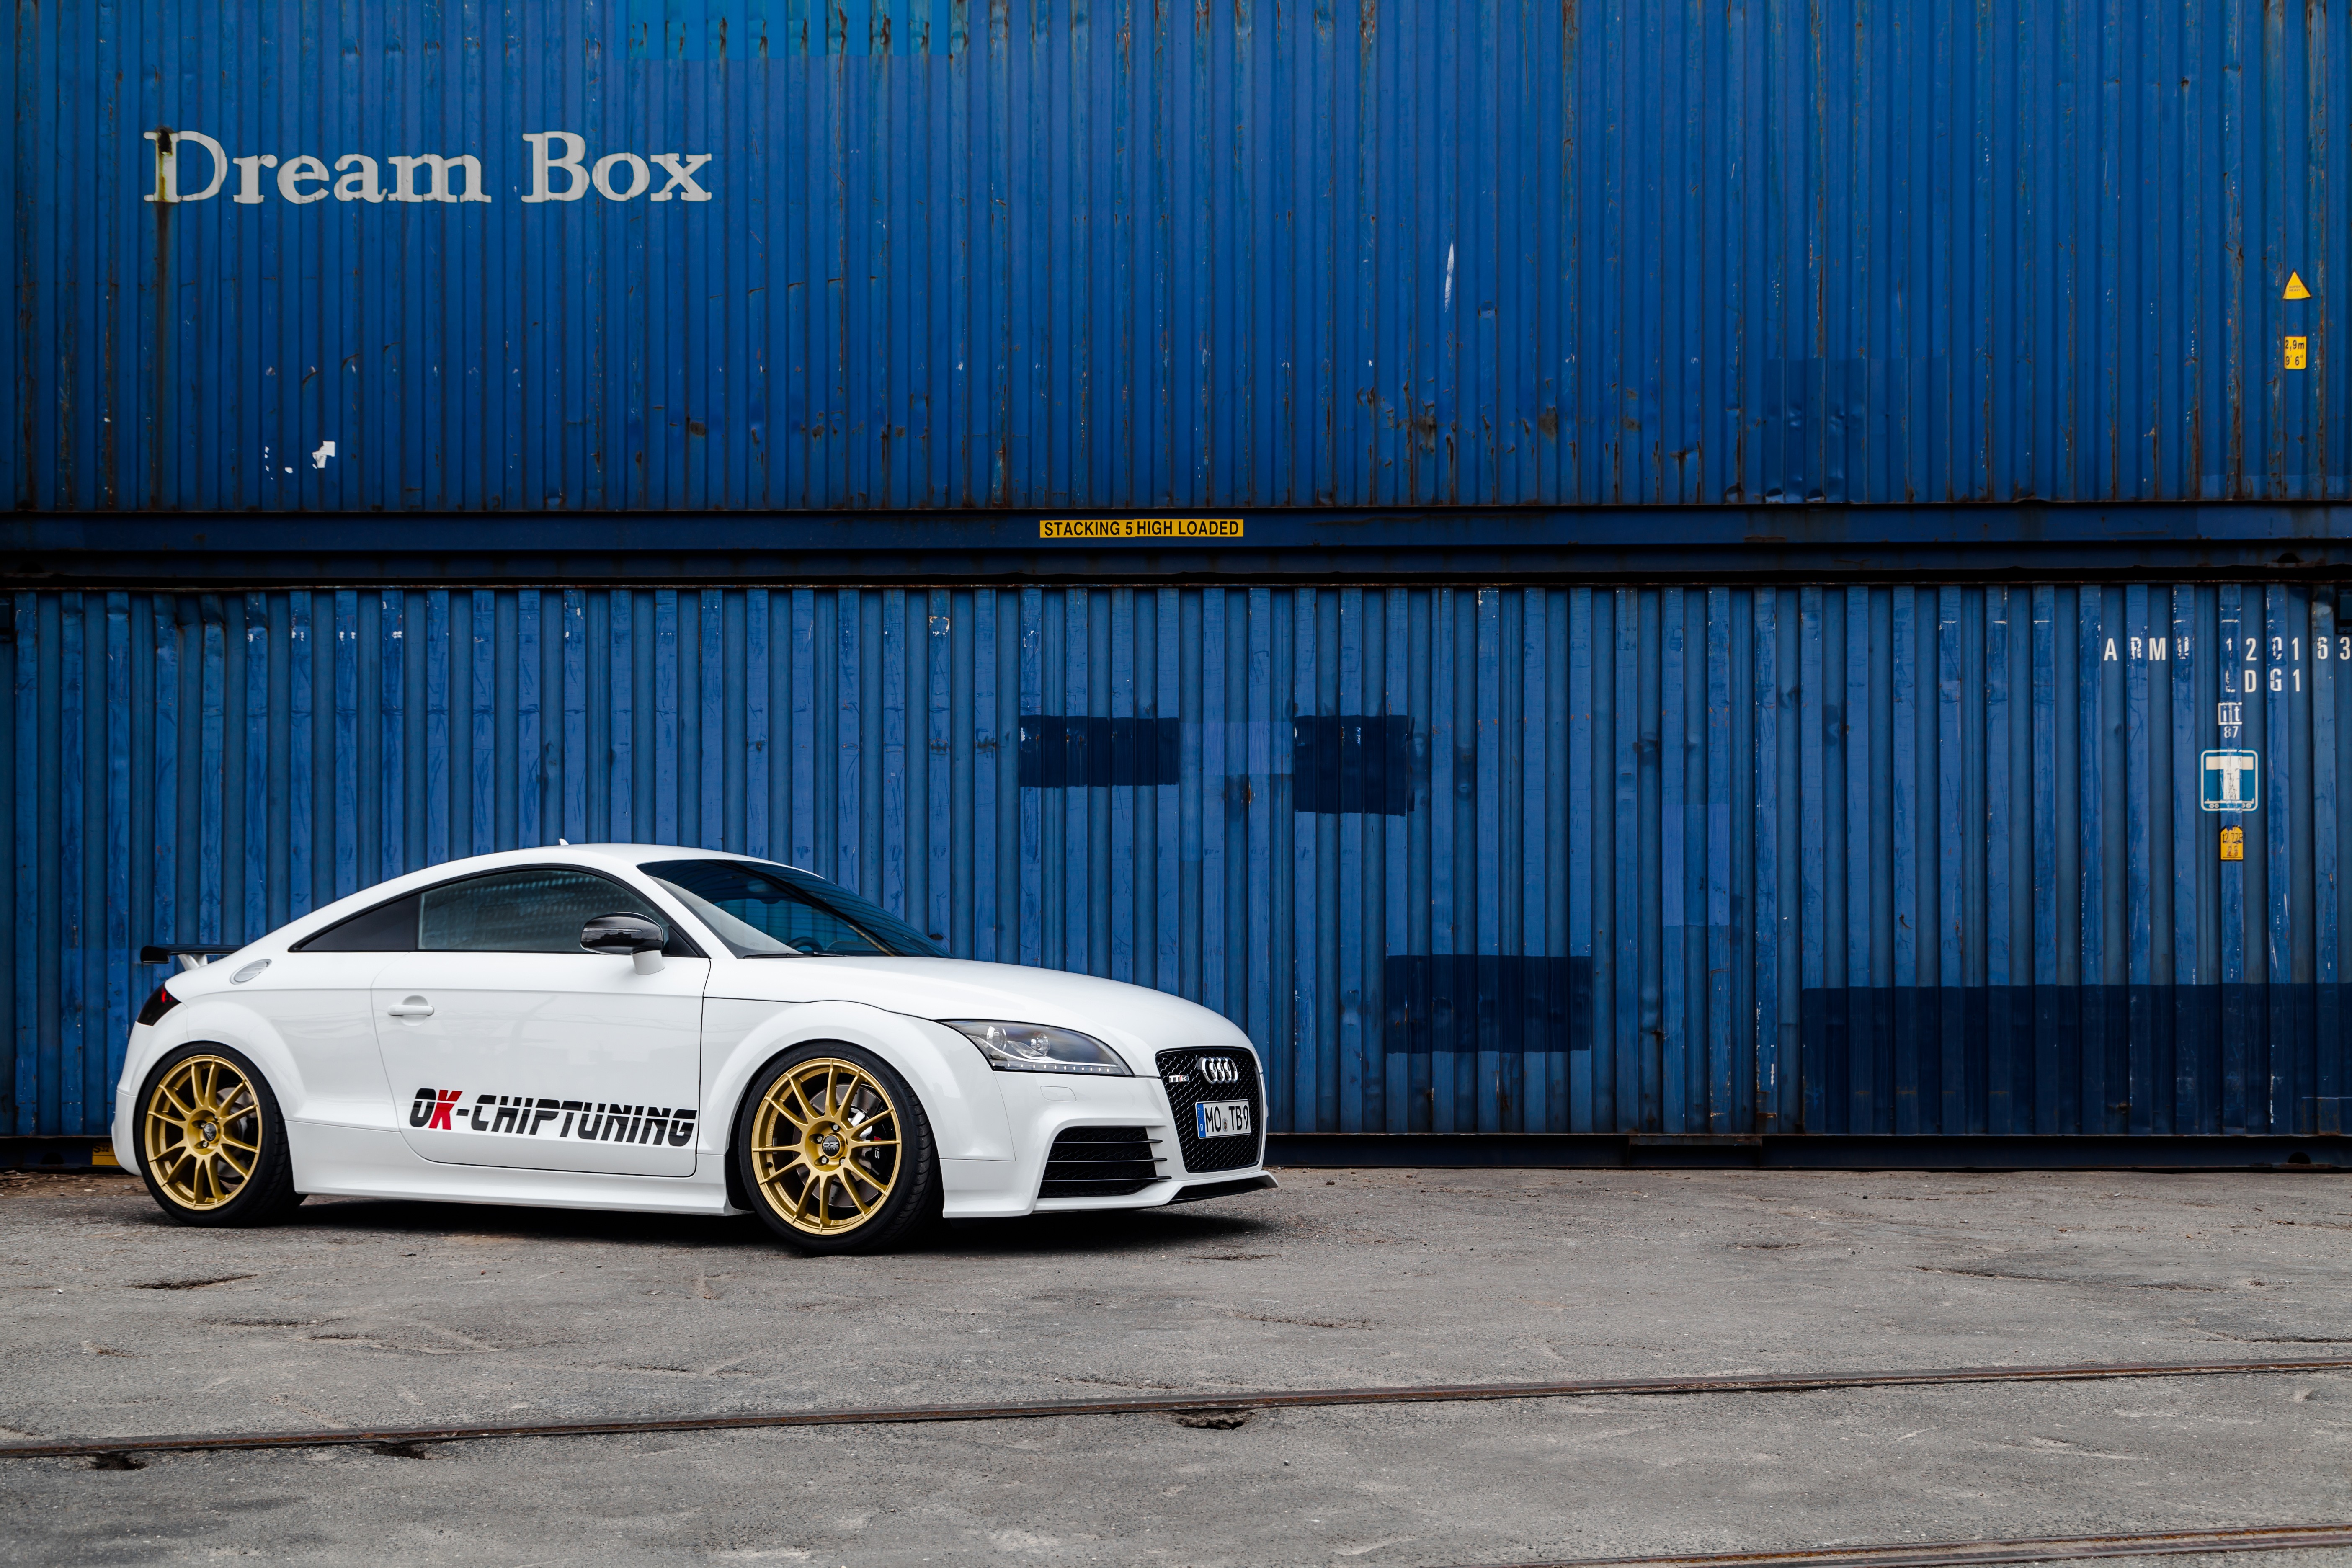 General 5616x3744 car Audi Audi TT tuning vehicle colored wheels white cars containers German cars